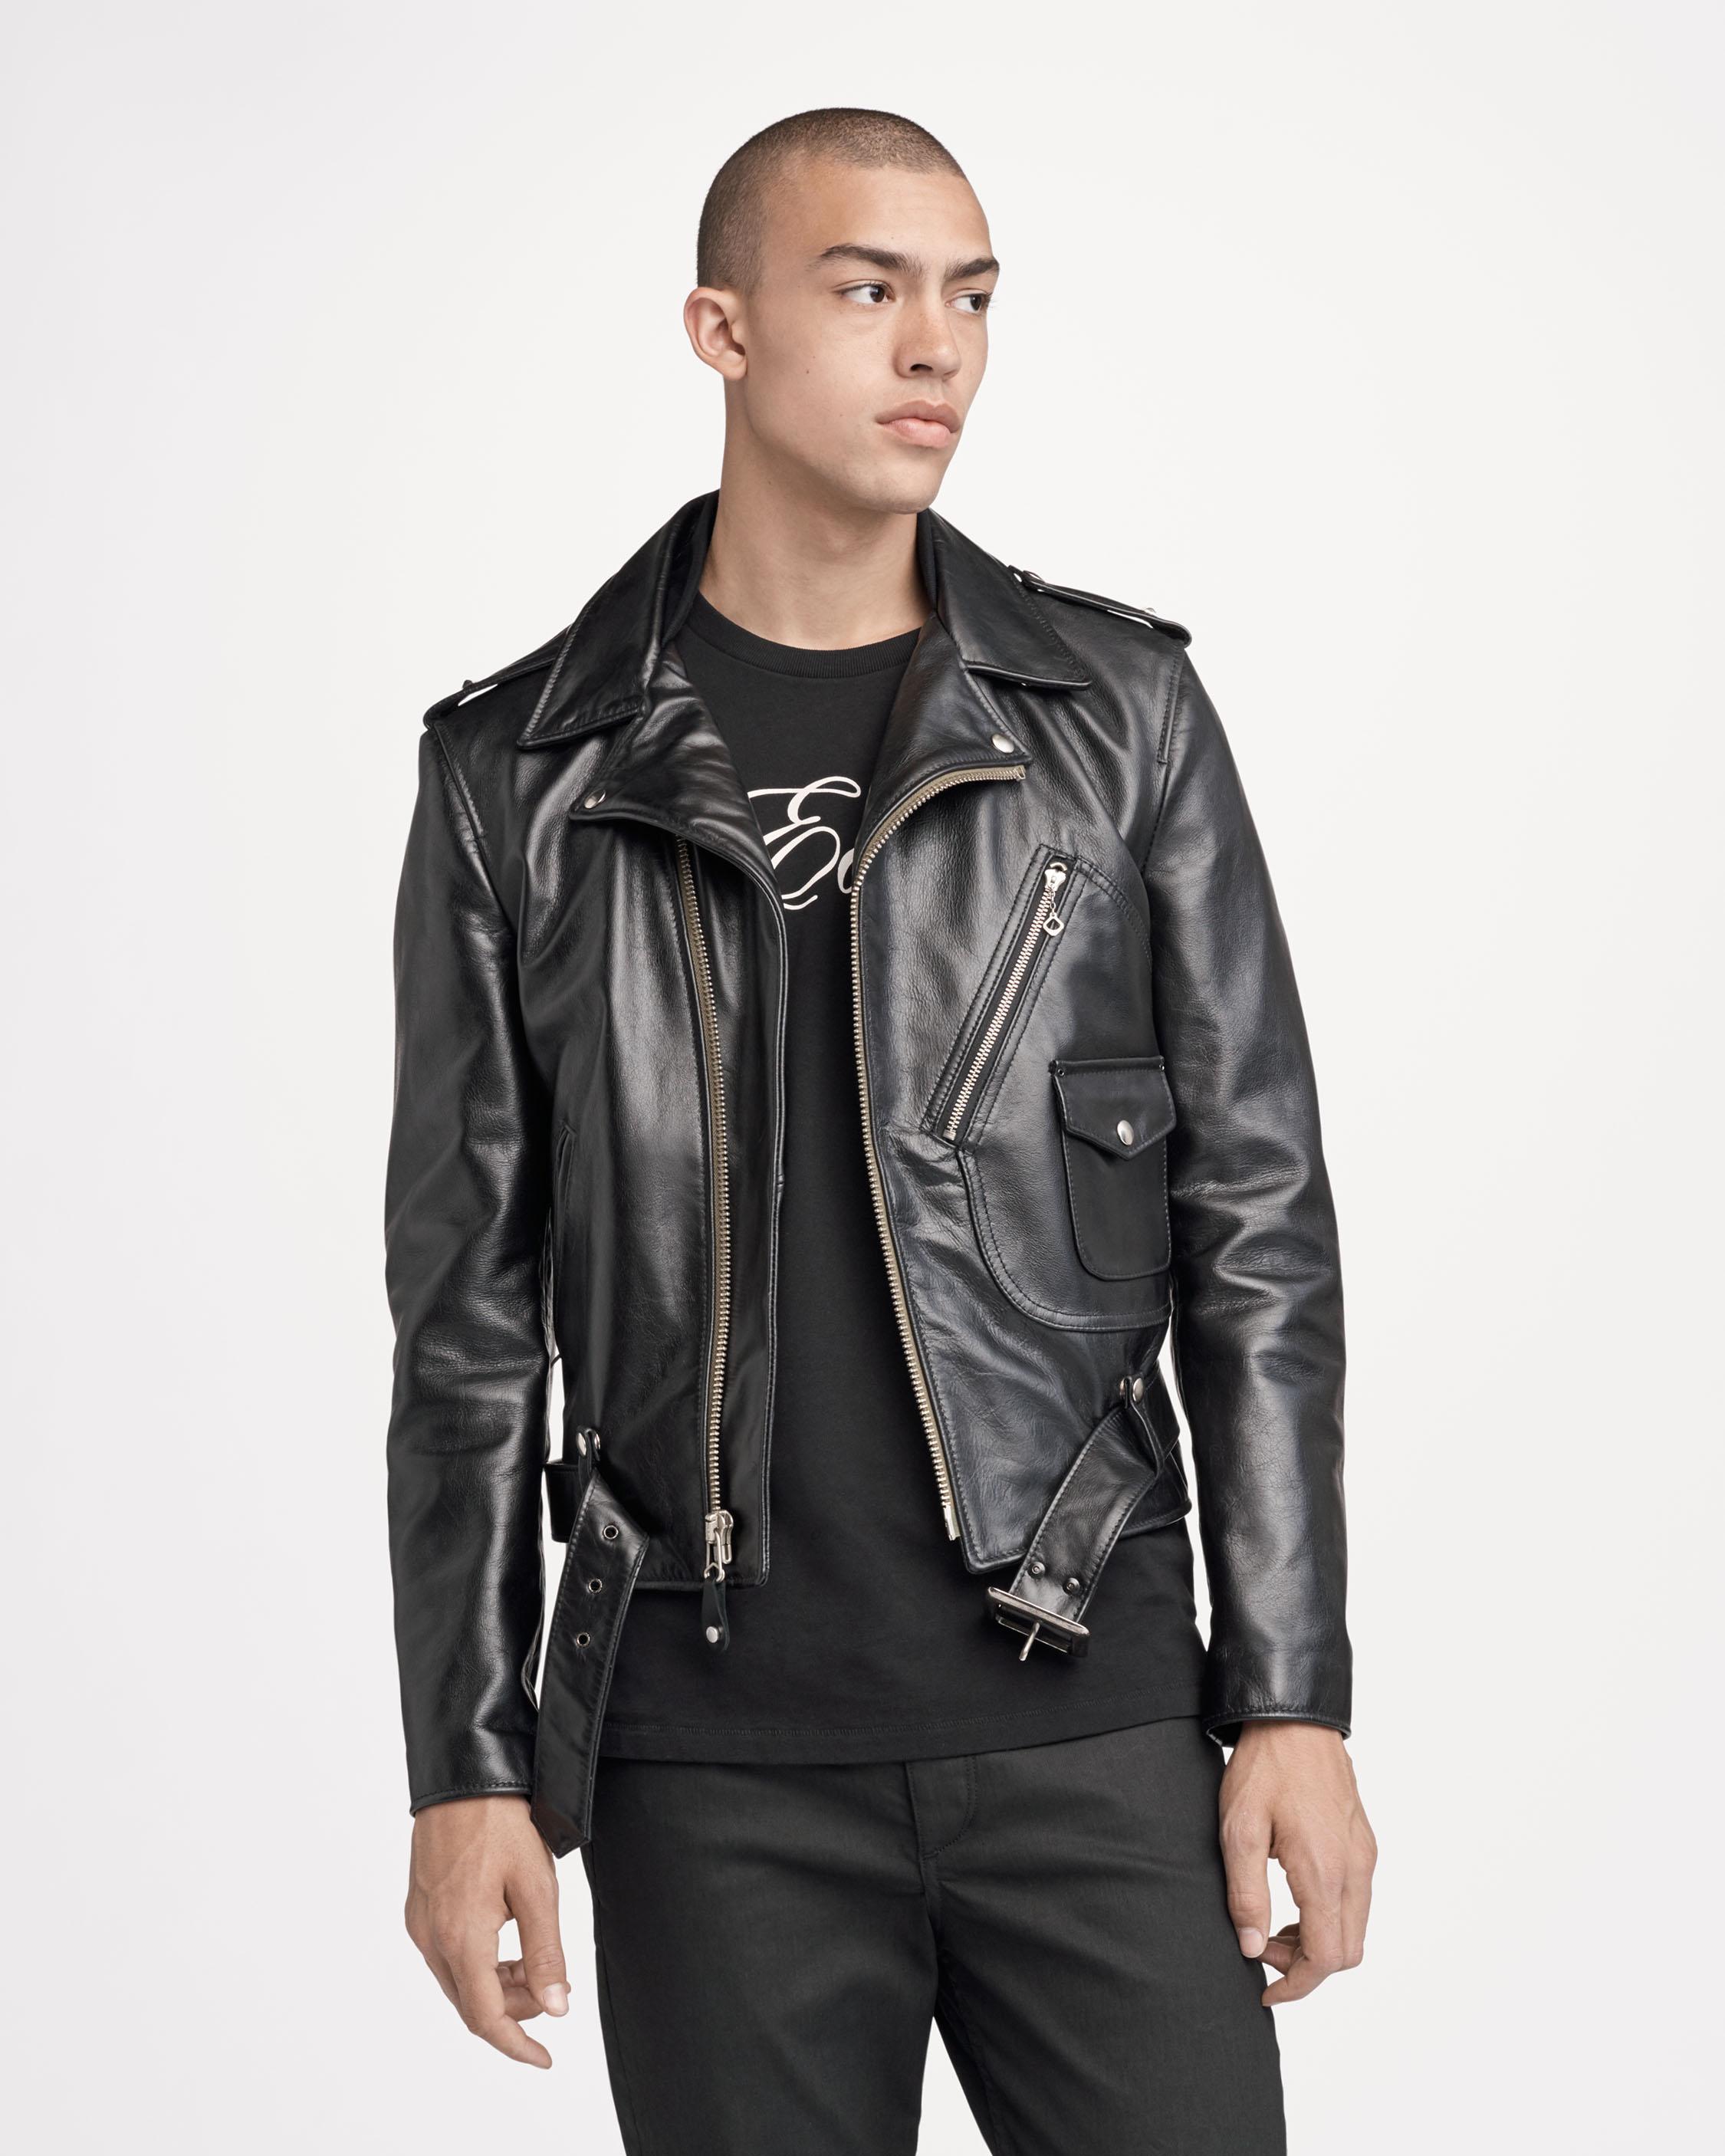 Jackets for leather men schott Leather Jackets